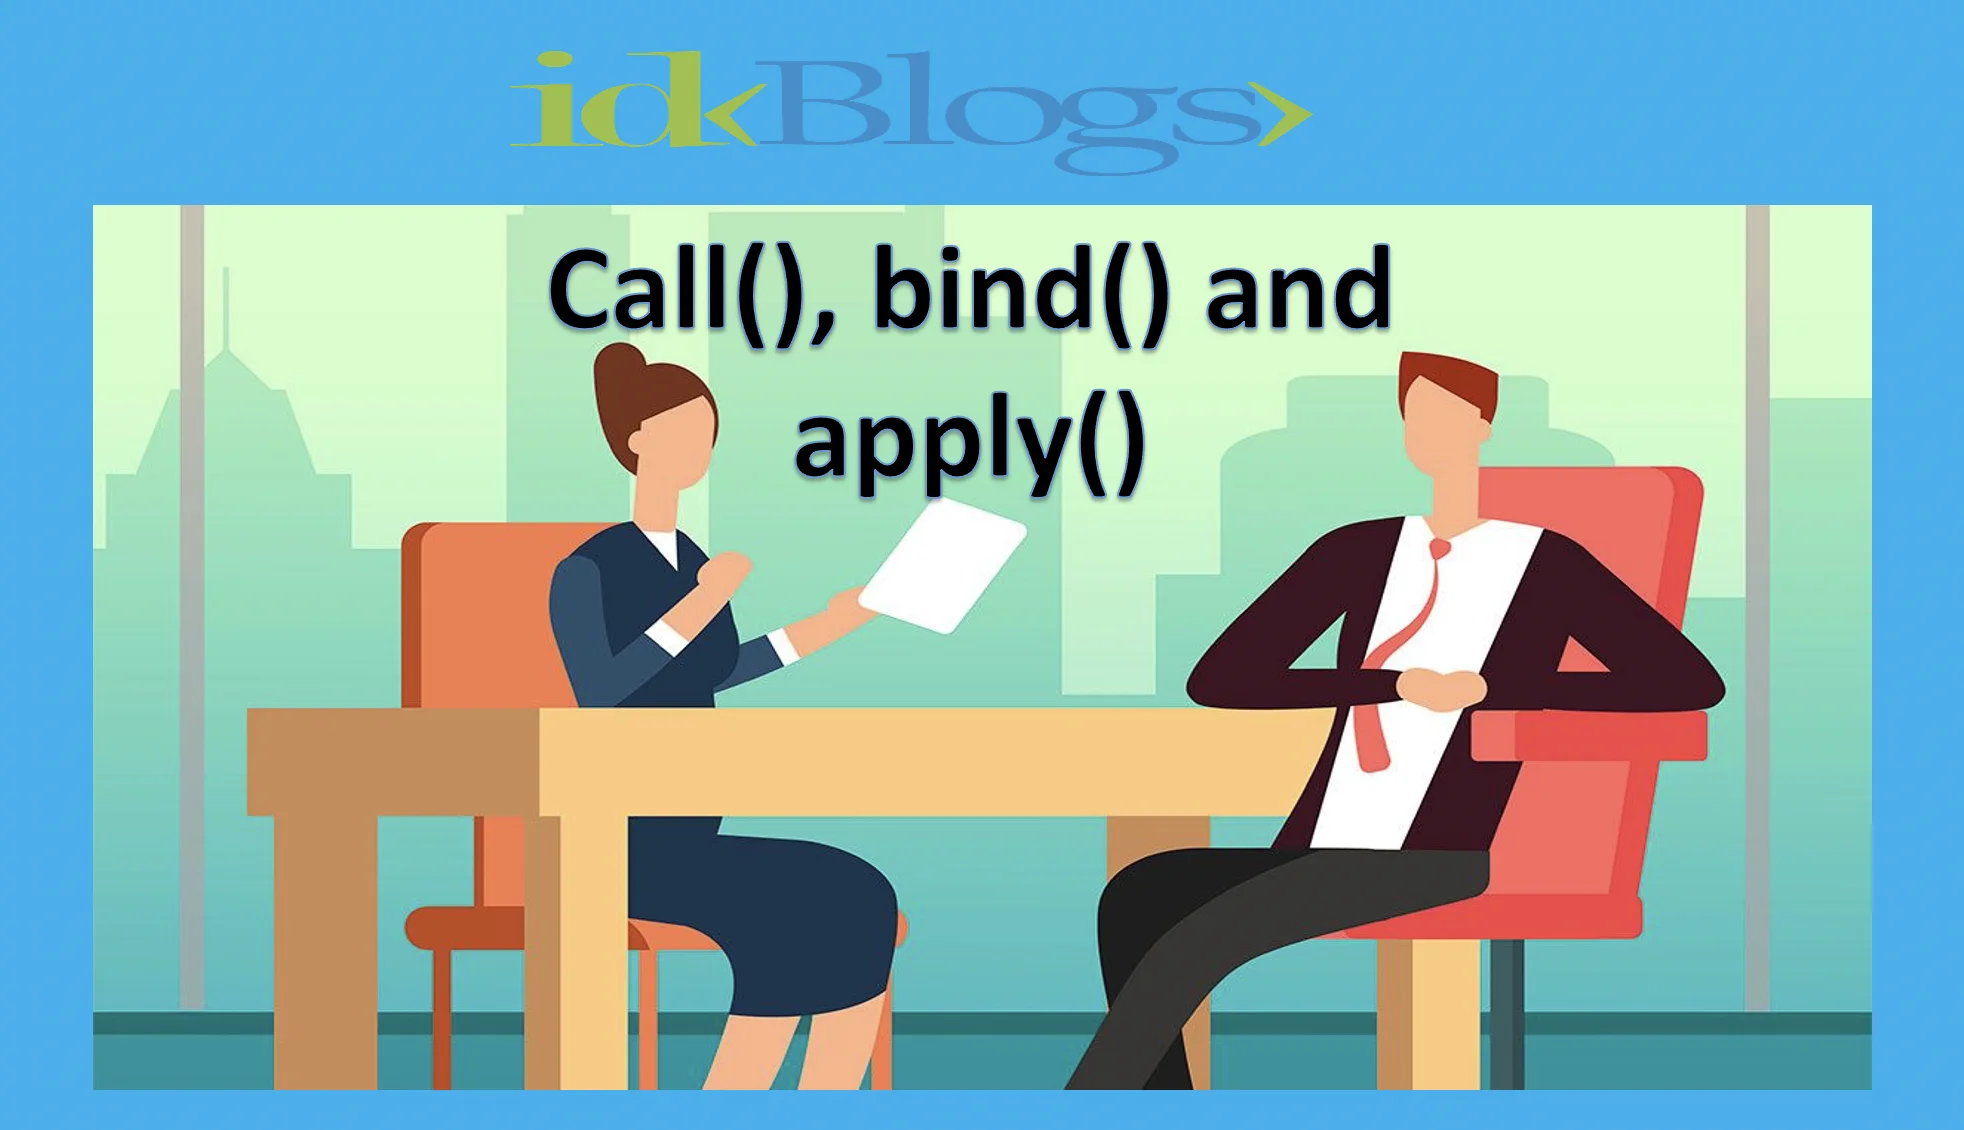 What is call(), bind() and apply() in JavaScript?